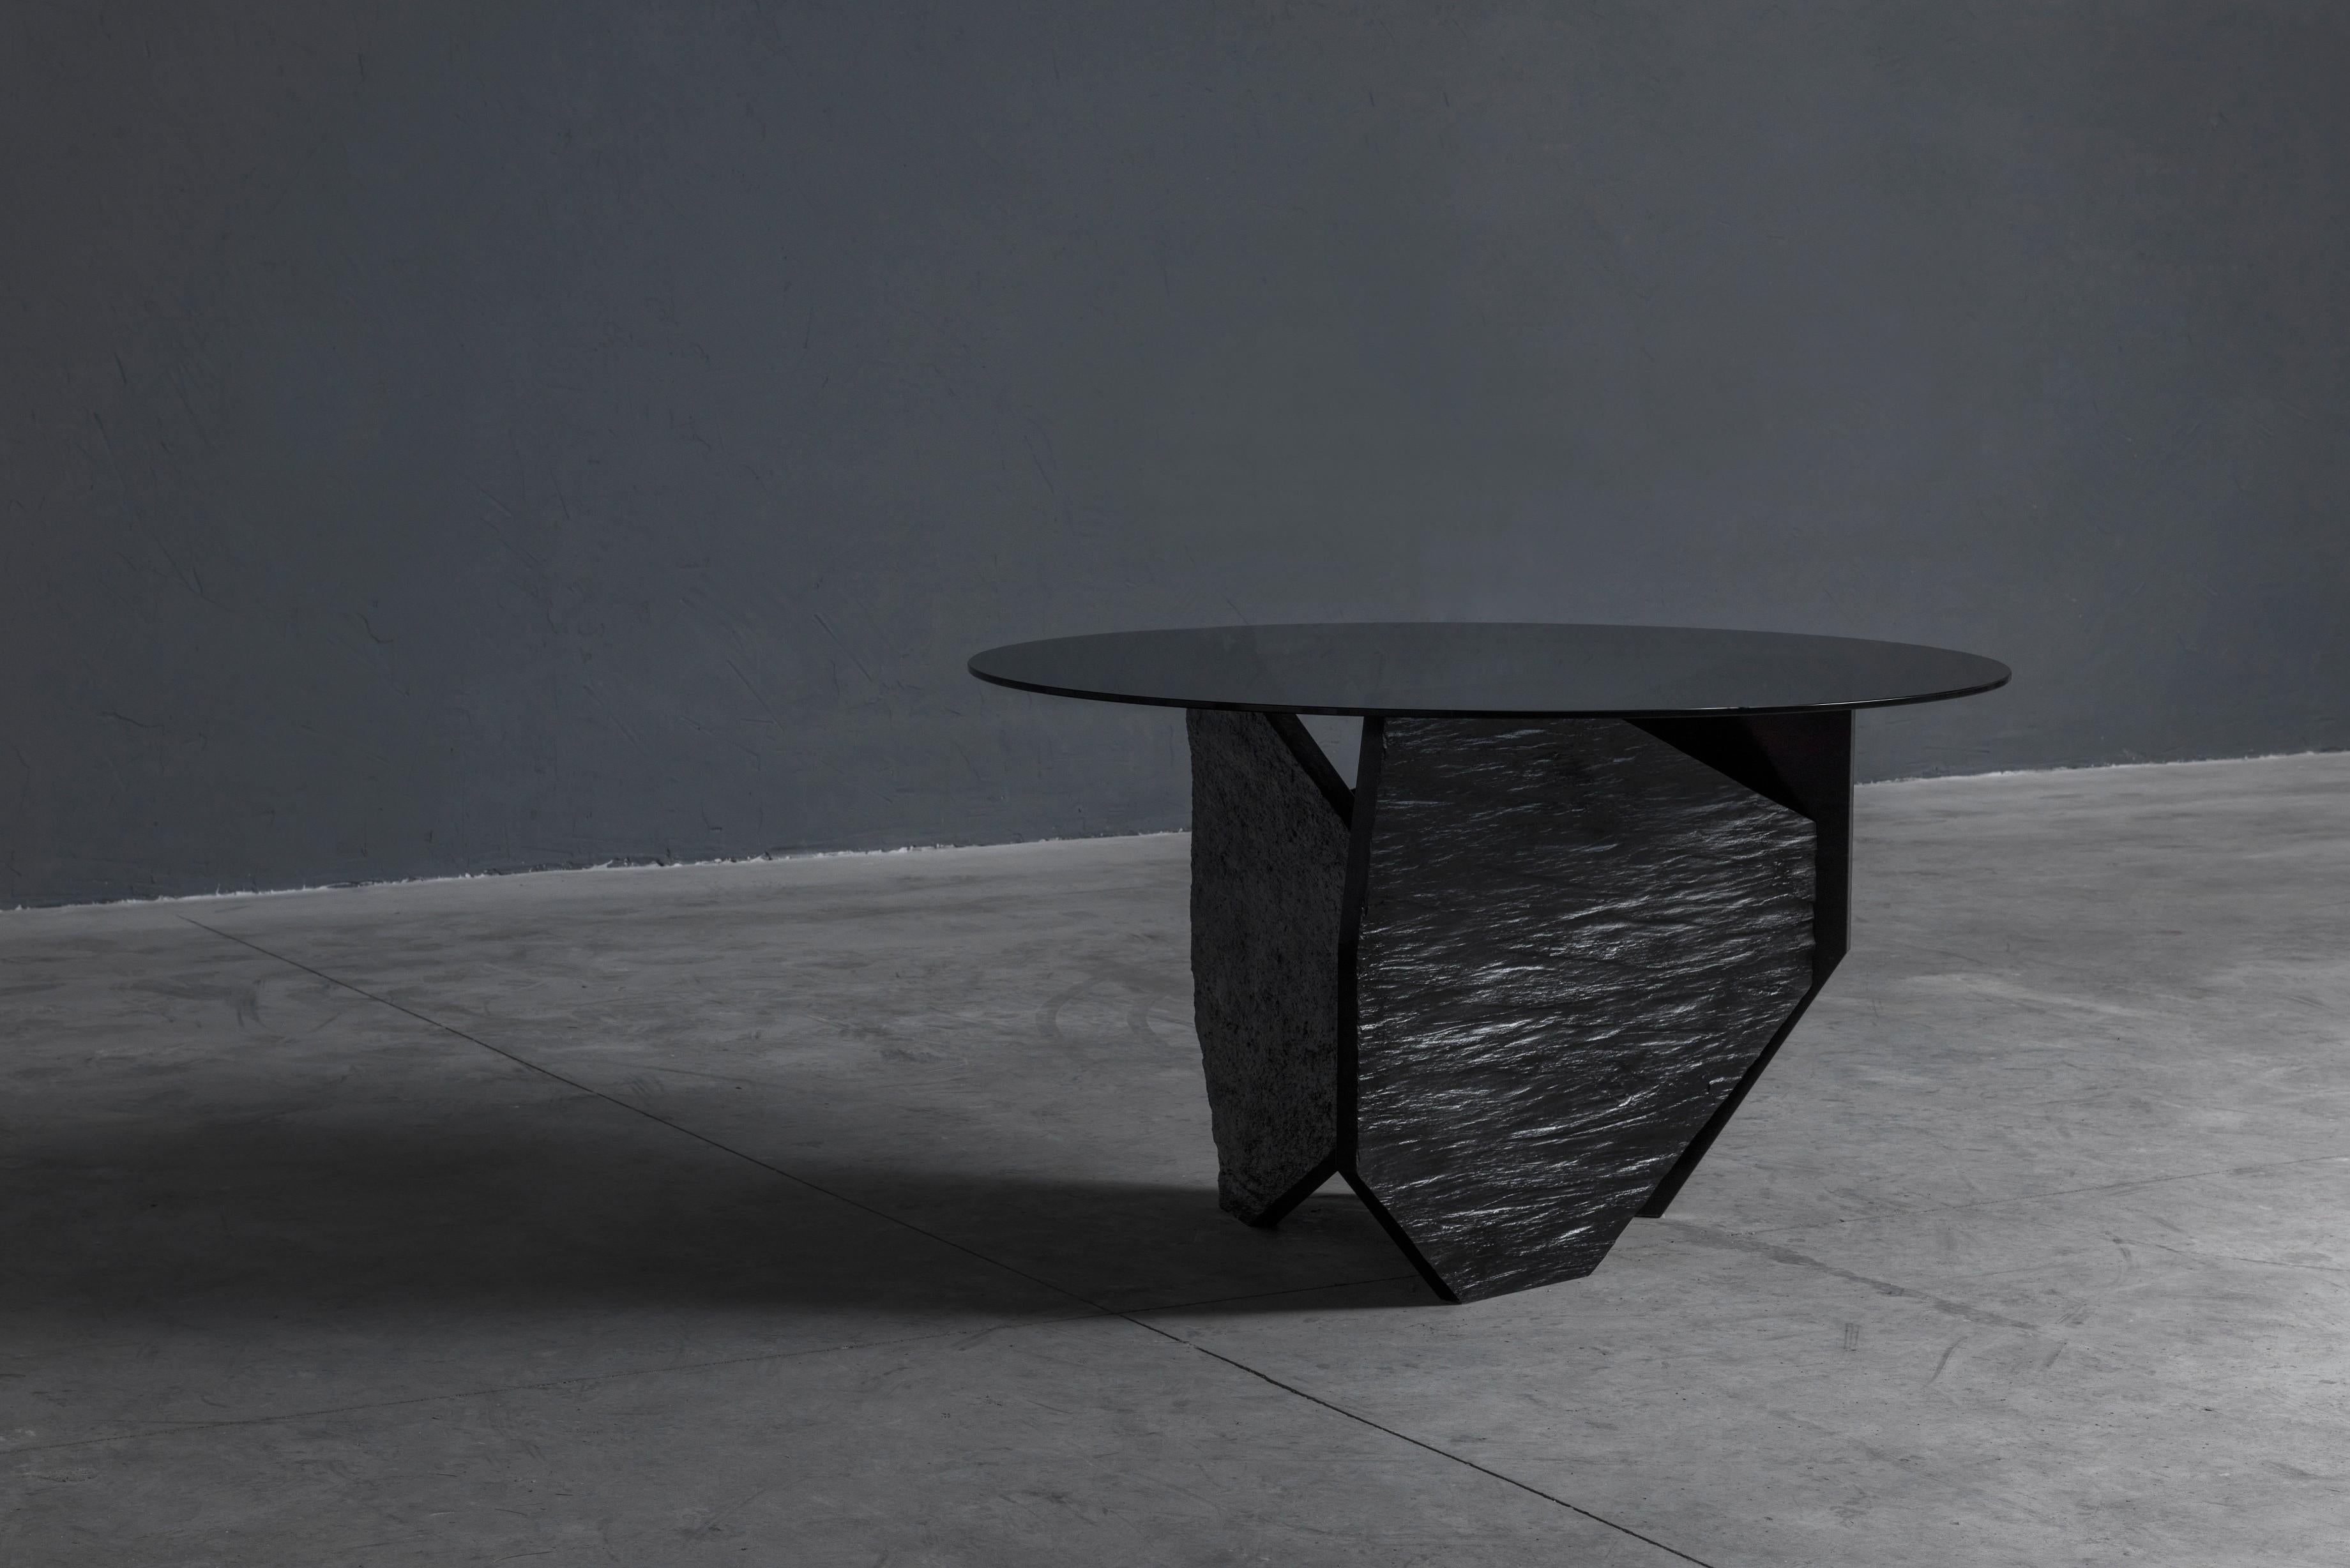 Marble slate dining table signed by Frederic Saulou
Designer: Frederic Saulou.
Title: Fragmenté
Materials: Trelaze black slate.
Dimensions: 75 x 130 x 130 cm
Edition of eight.
Signed and numbered.

